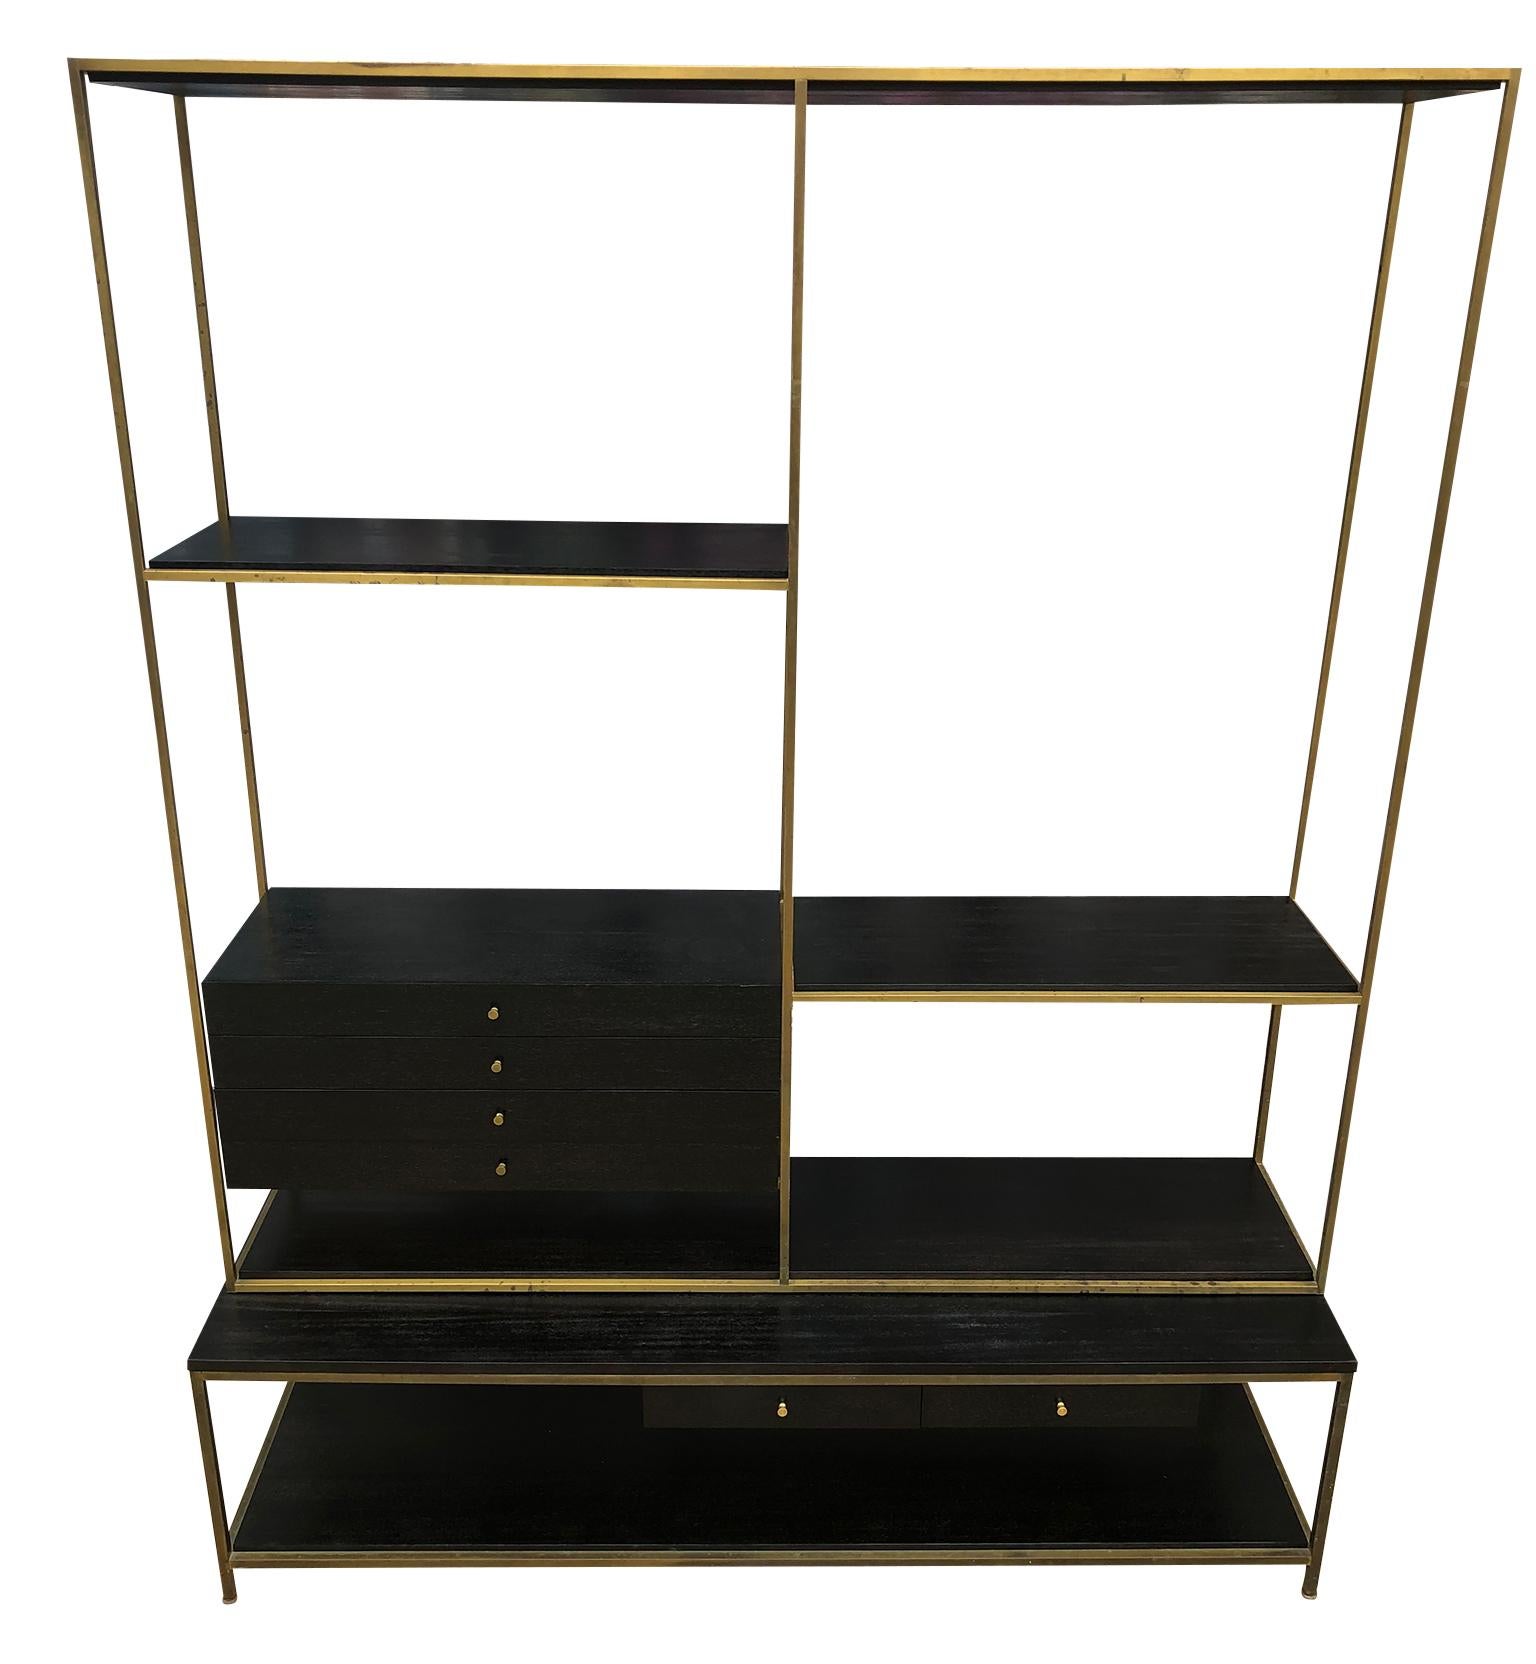 Midcentury American designer Paul McCobb freestanding brass room divider for Calvin. Units #7905 & #9305 with black lacquer finish. This unit is in Beautiful vintage condition - Has (4) upper drawers and (2) lower drawers - All mahogany with a Black